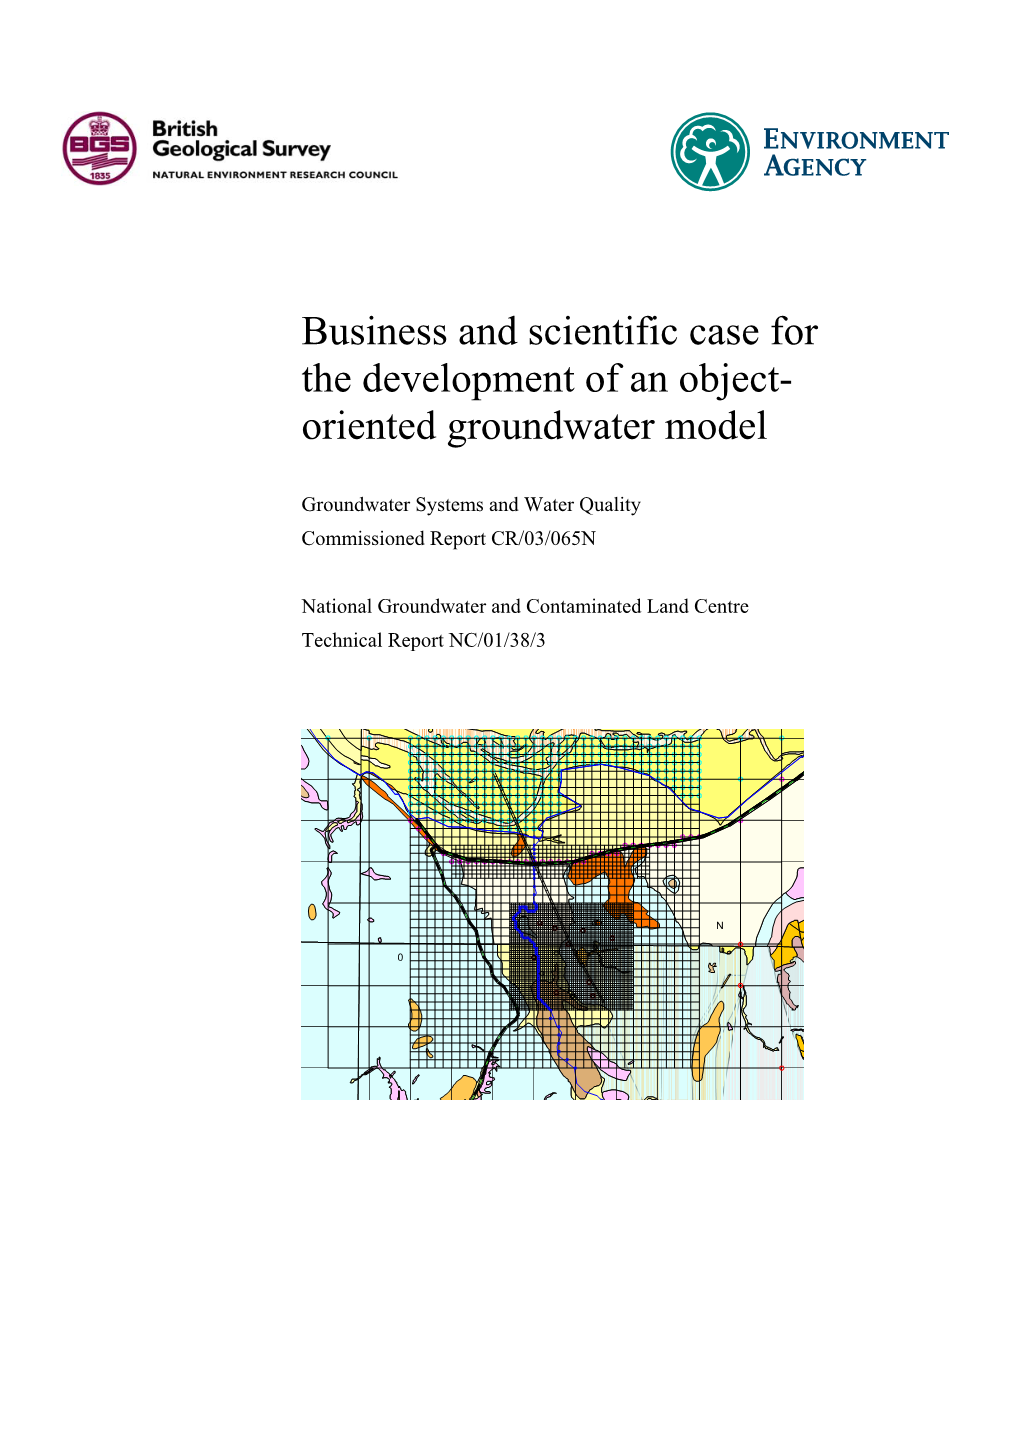 Business and Scientific Case for the Development of an Object-Oriented Groundwater Model